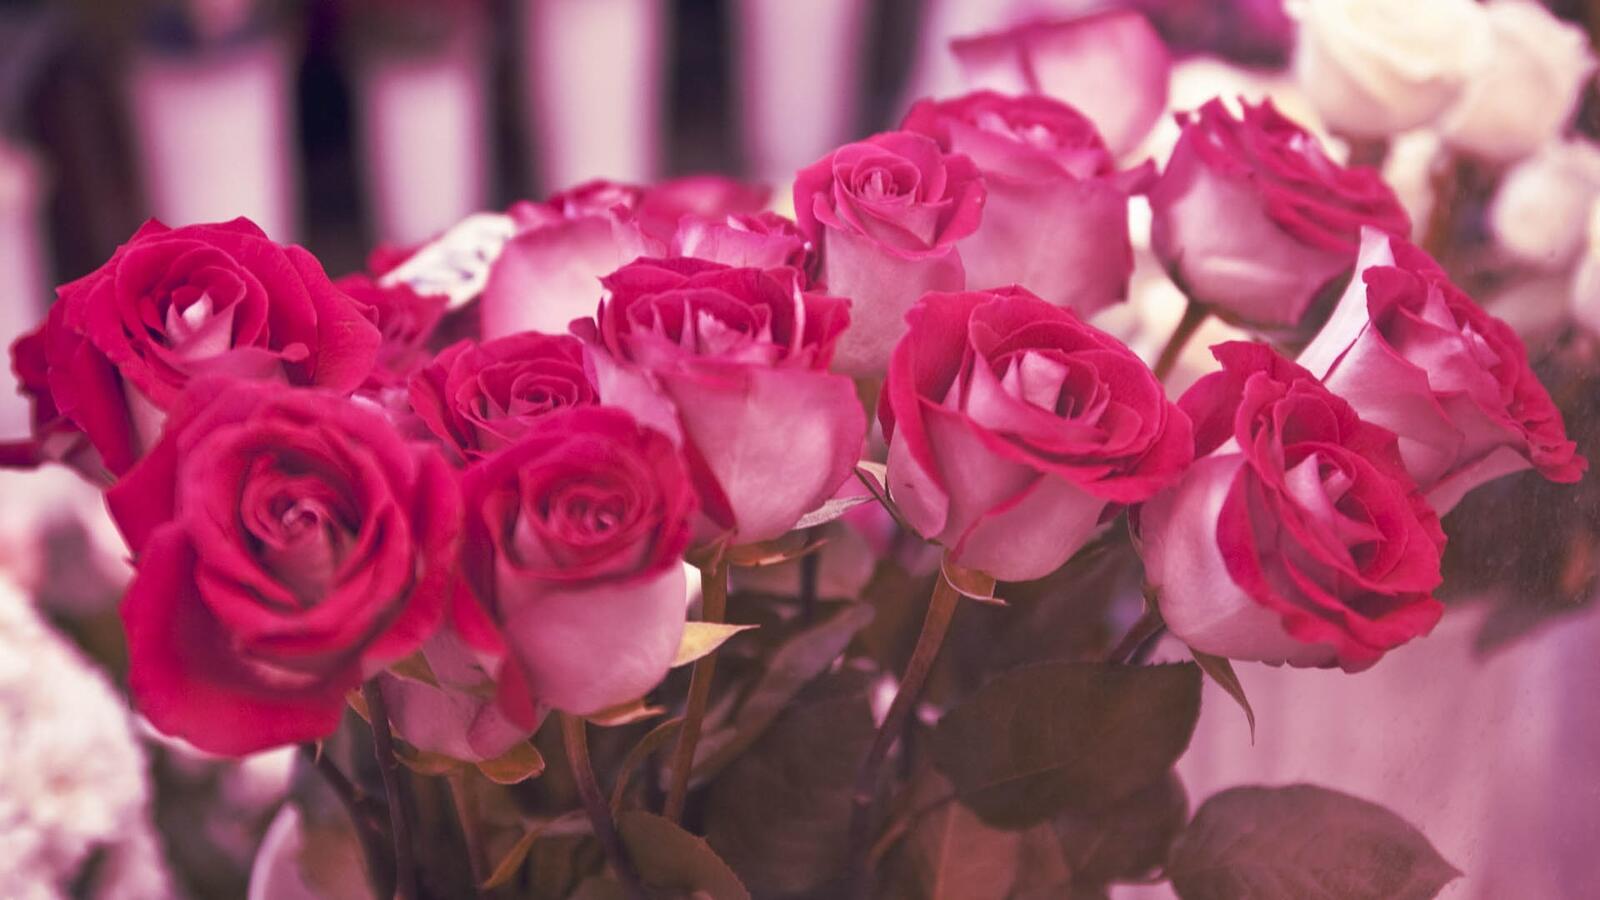 Free photo A bouquet of pink roses